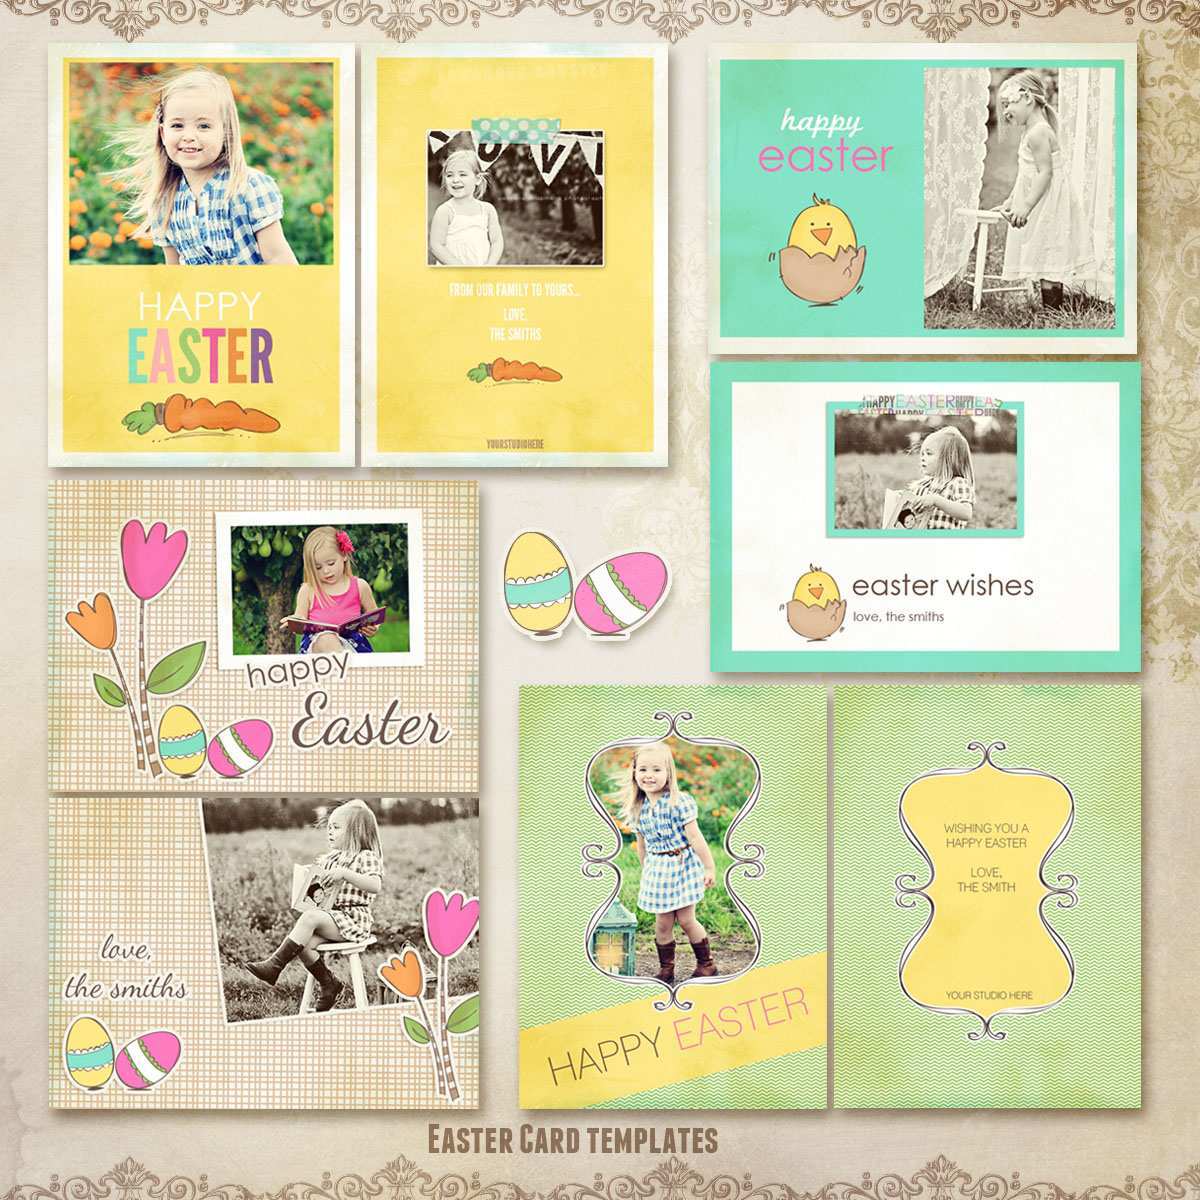 18 The Best Easter Card Templates For Photoshop Download with Easter Card Templates For Photoshop